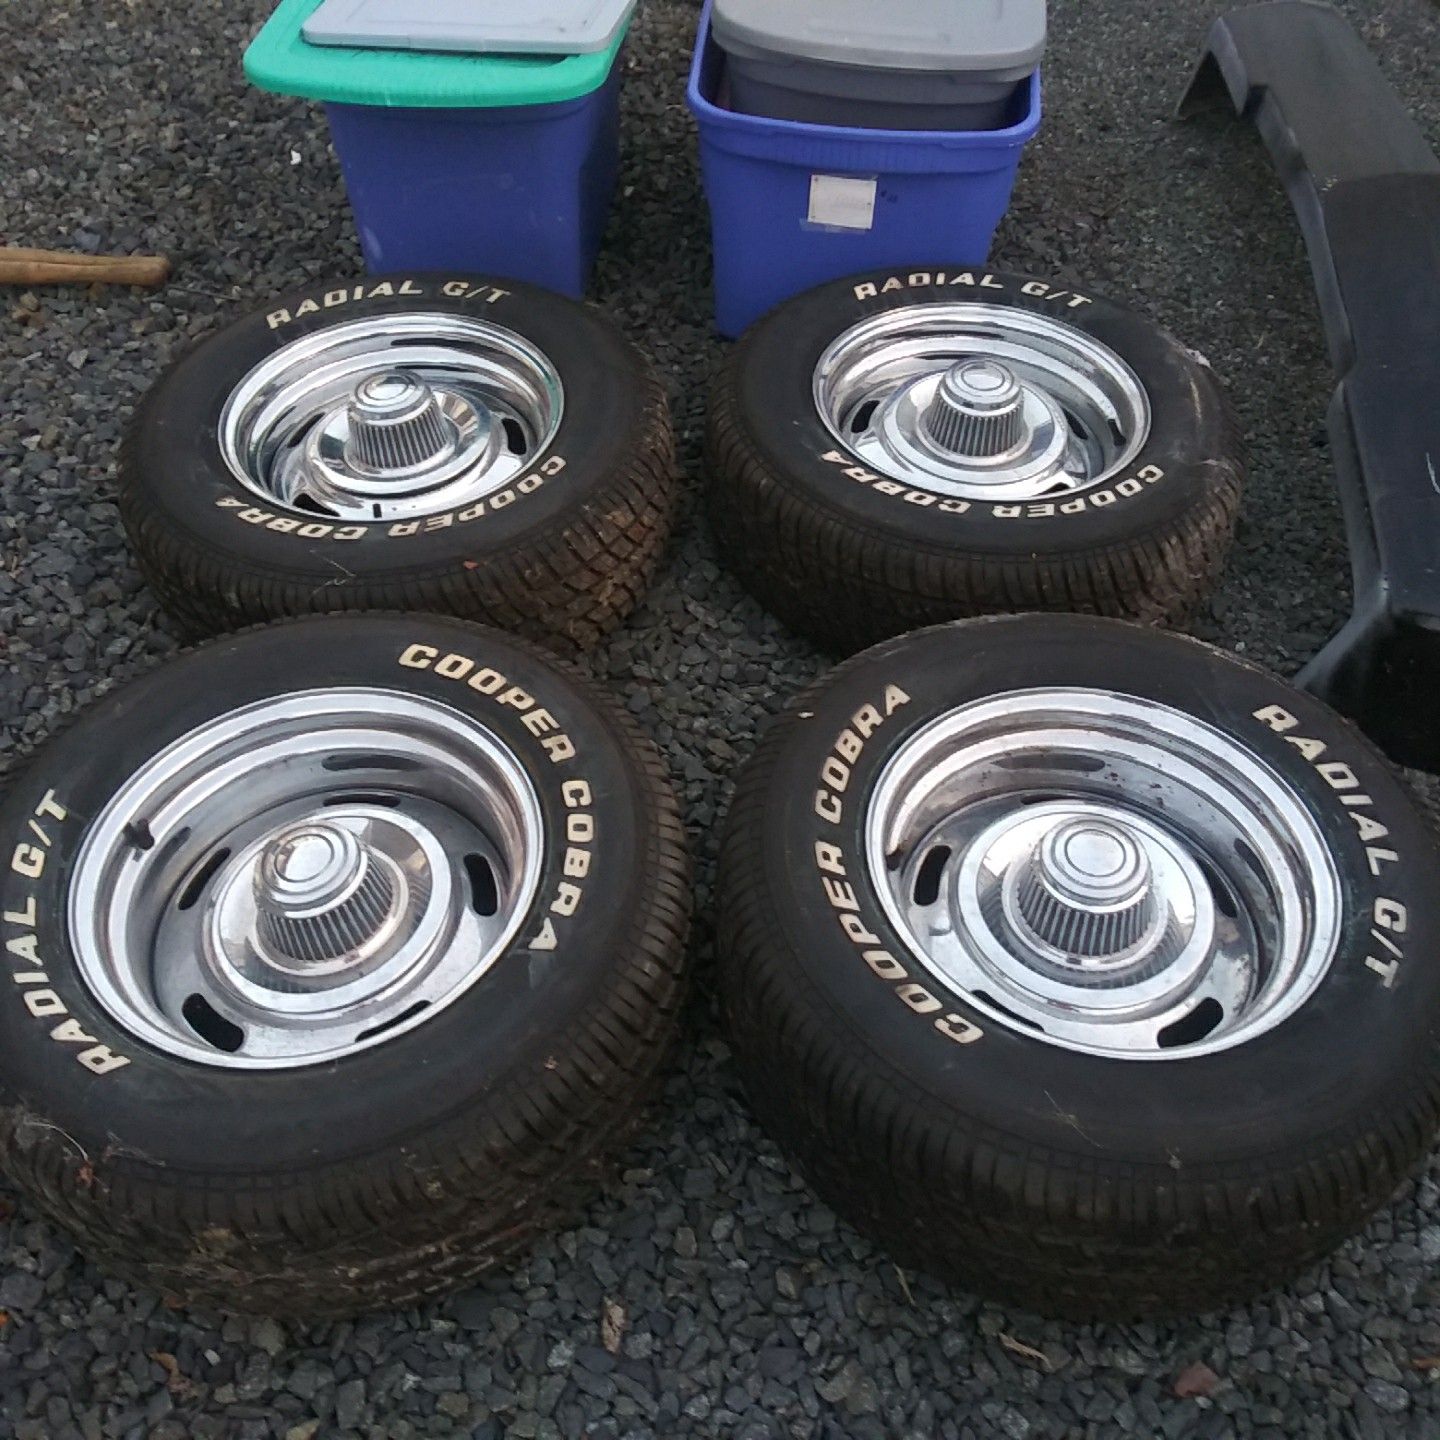 Corvette chrome rally rims and center caps with new tires. P255/60R15